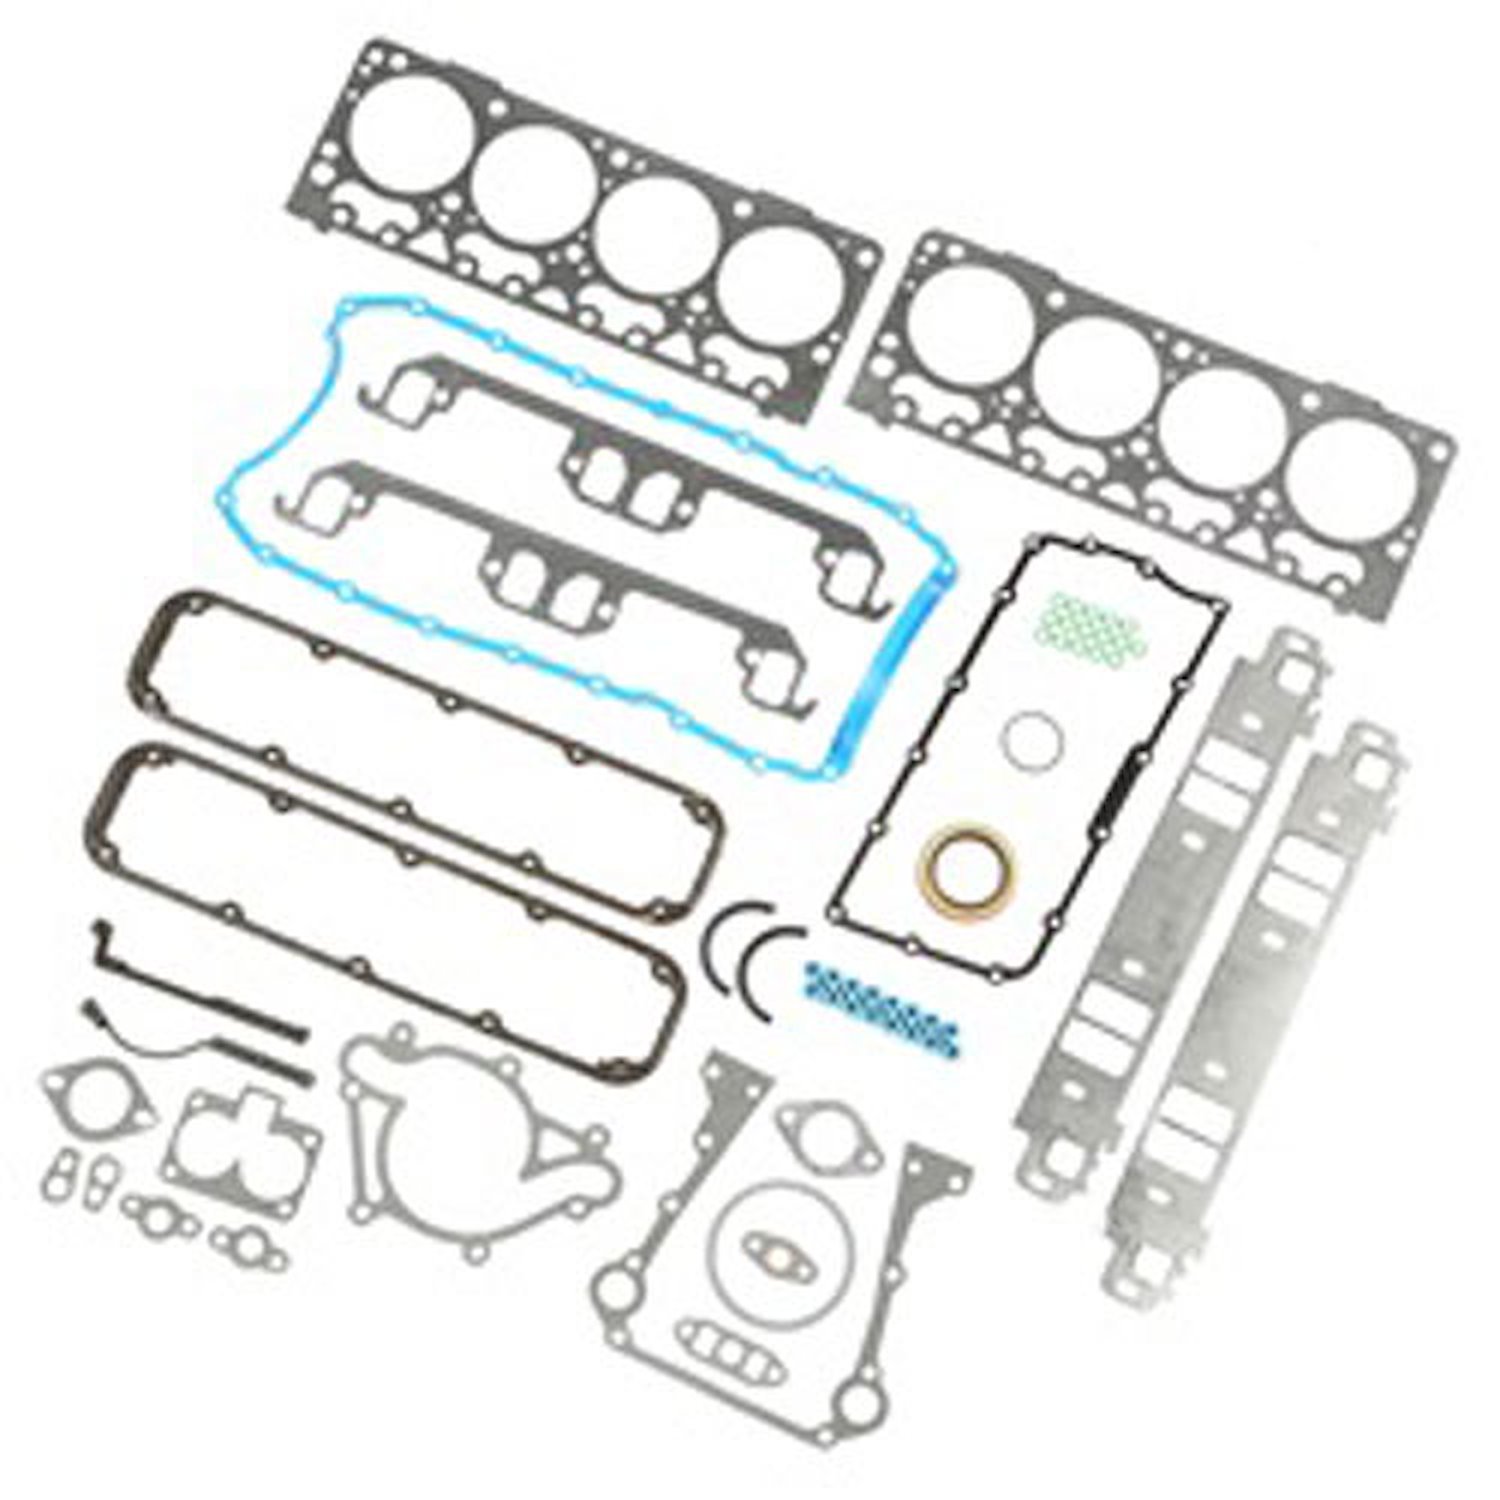 This full engine gasket set from Omix-ADA fits 93-98 Jeep Grand Cherokees with 5.2L engines.